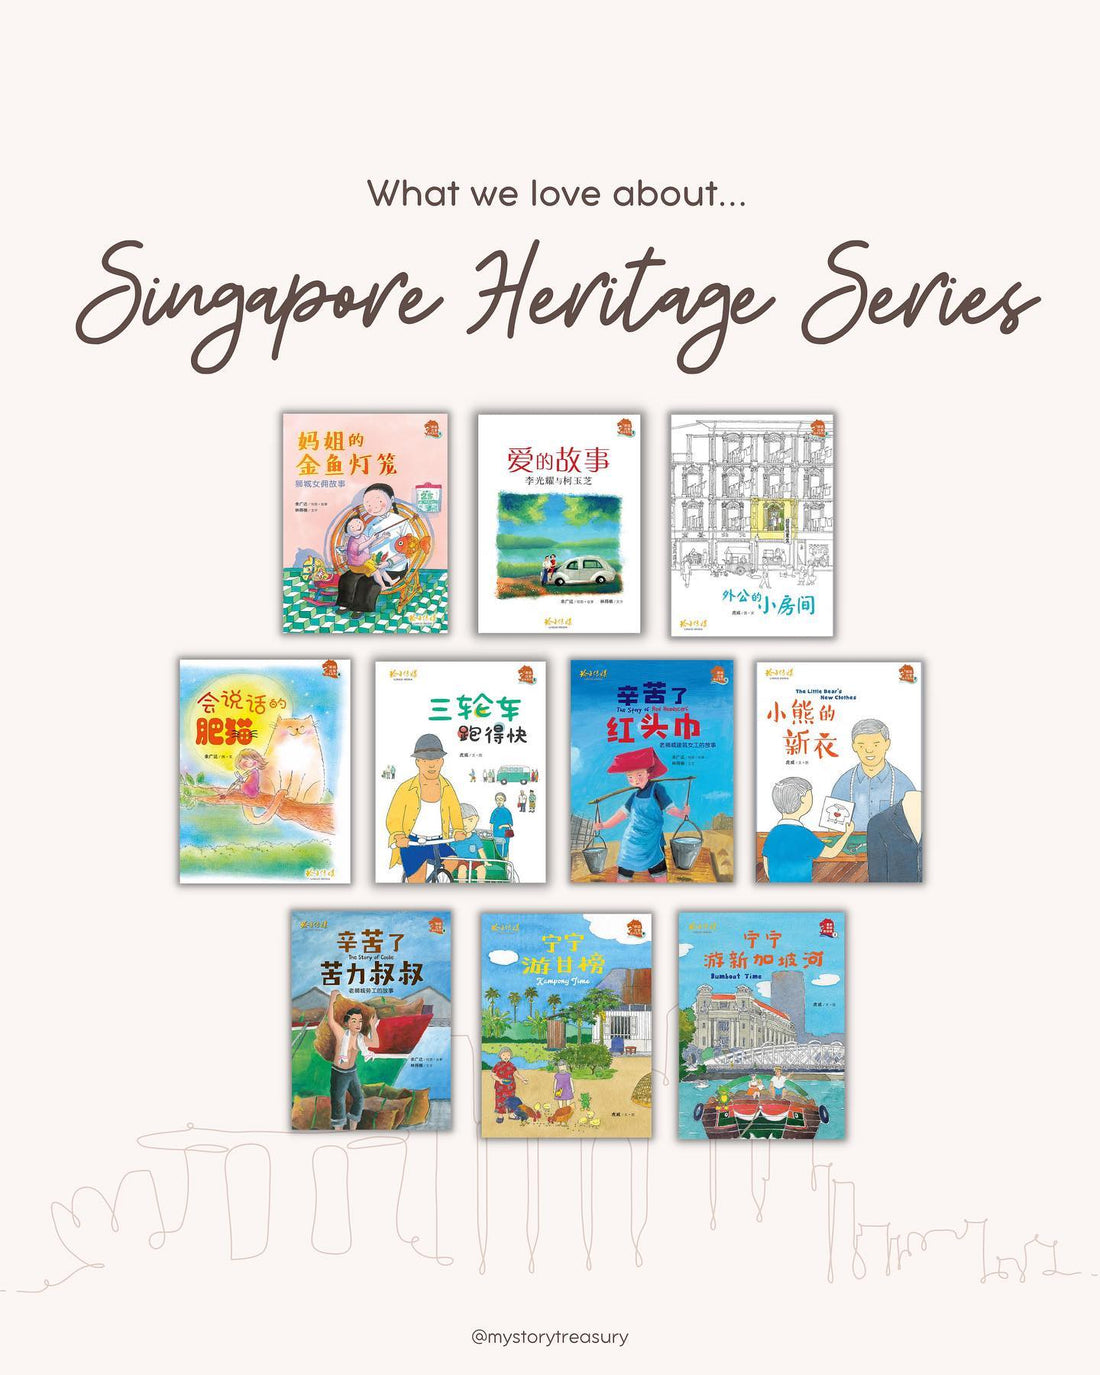 Want to learn more about Singapore's heritage?